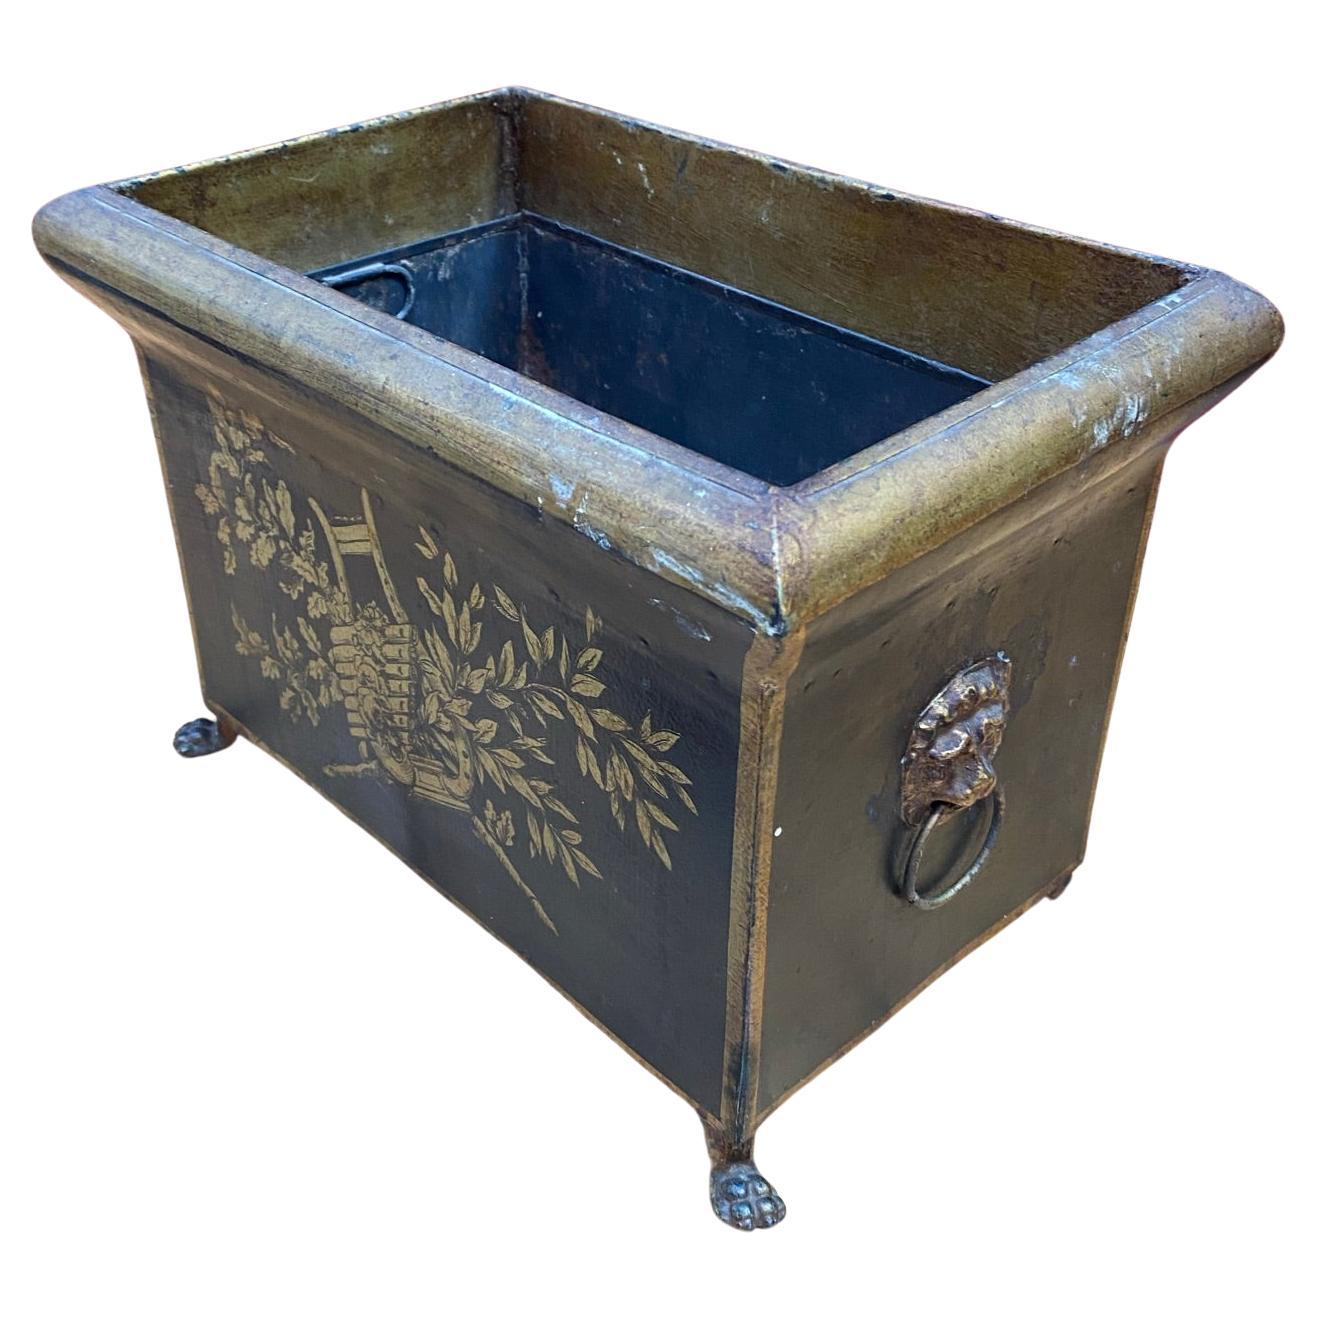 Neo Classical Brass Planter with Paw Feet & Lion Head Ring Handles, circa 1880